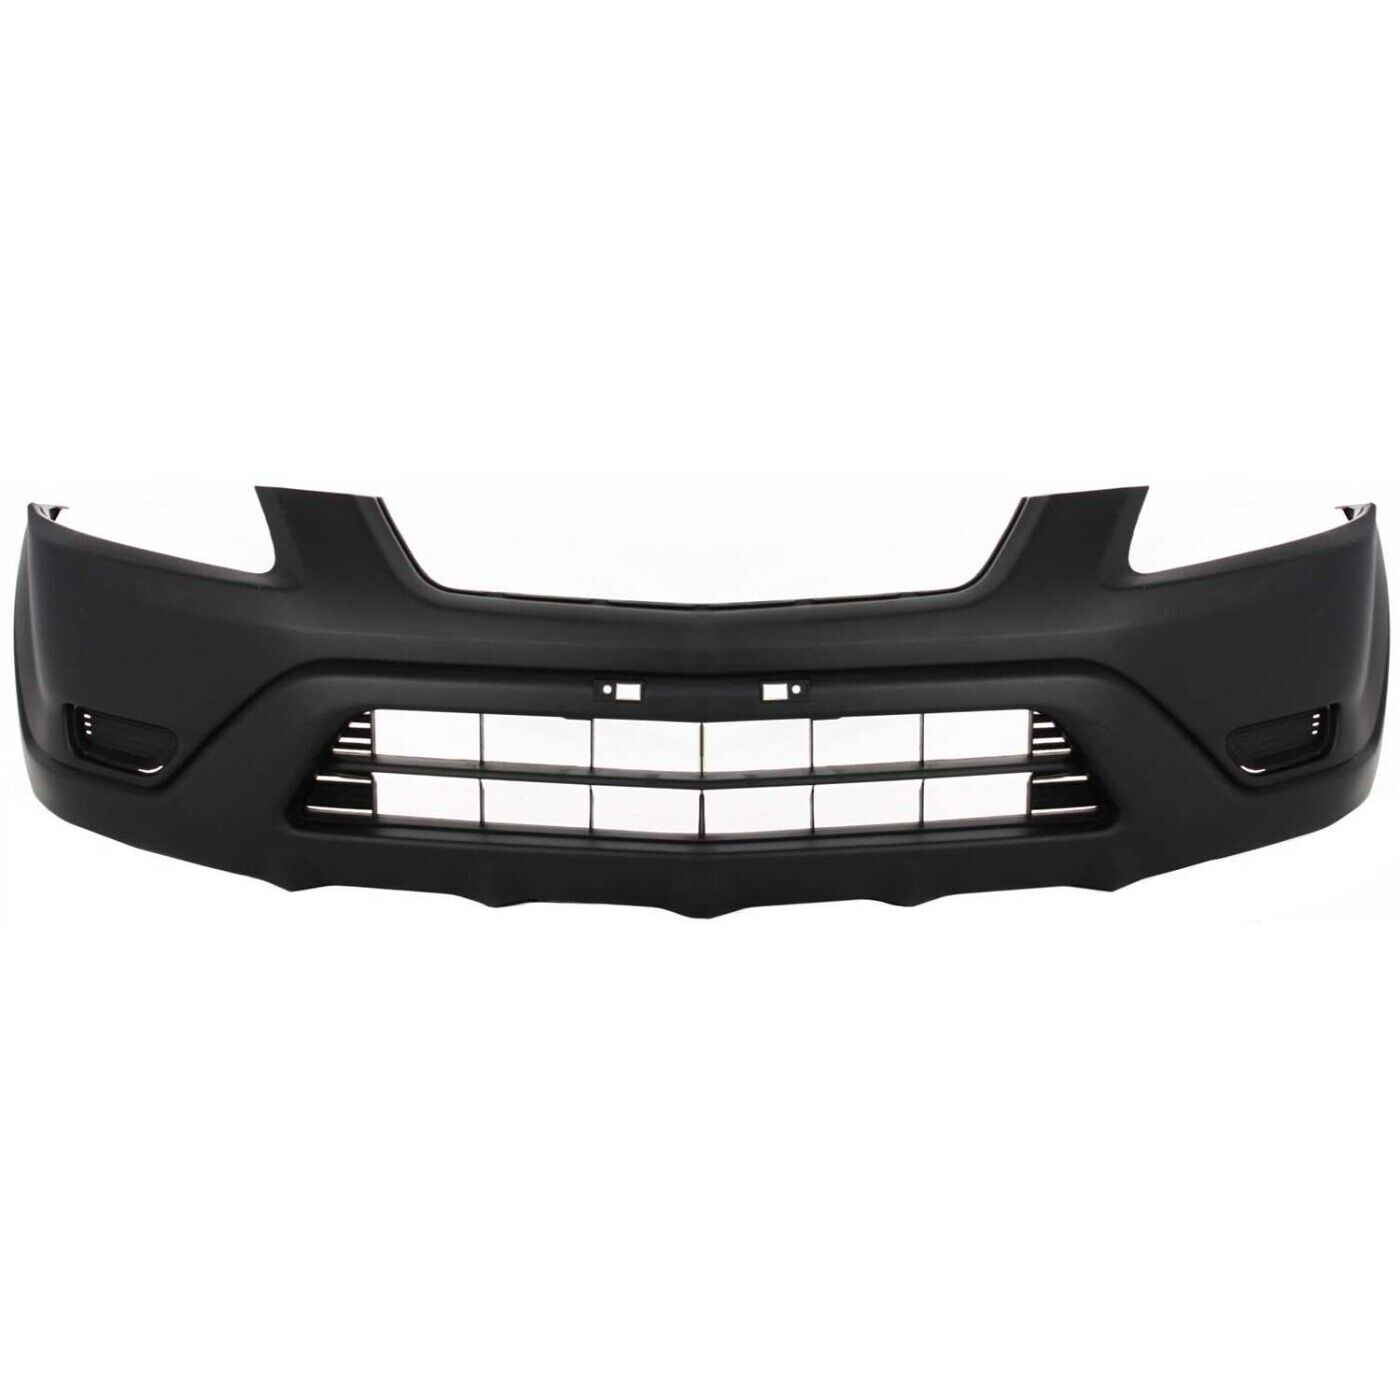 NEW - Black Textured Front Bumper Cover Replacement For 2002-2004 Honda CRV CR-V